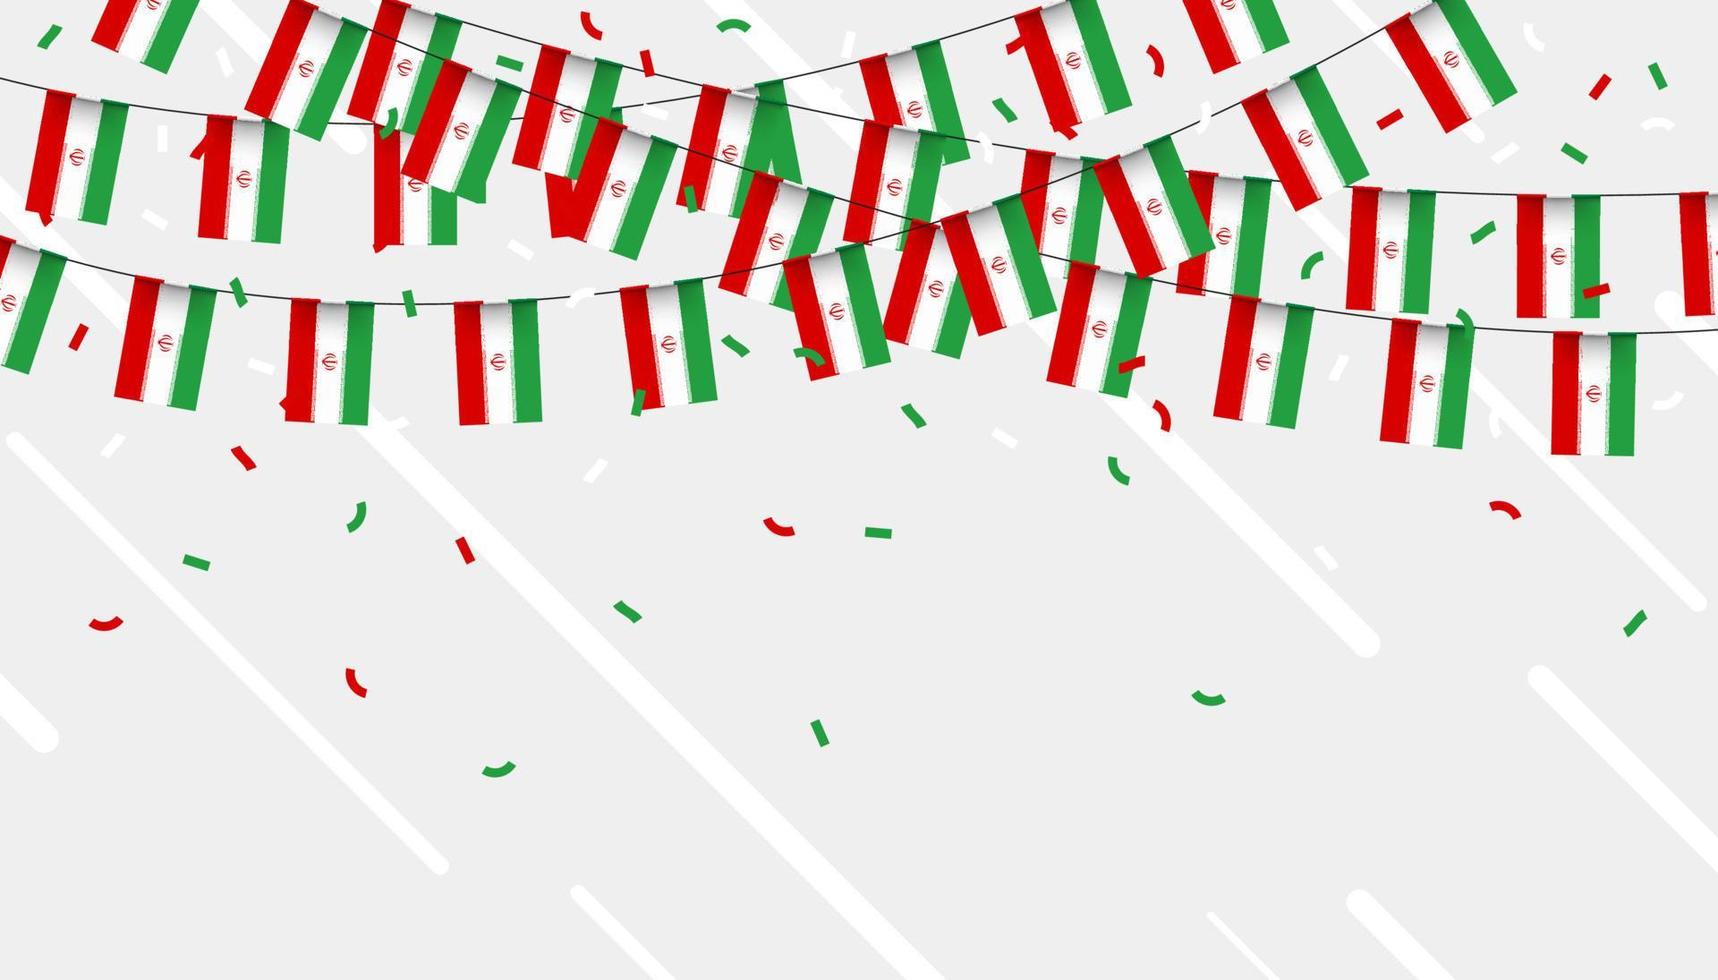 Iran celebration bunting flags with confetti and ribbons on white background. vector illustration.